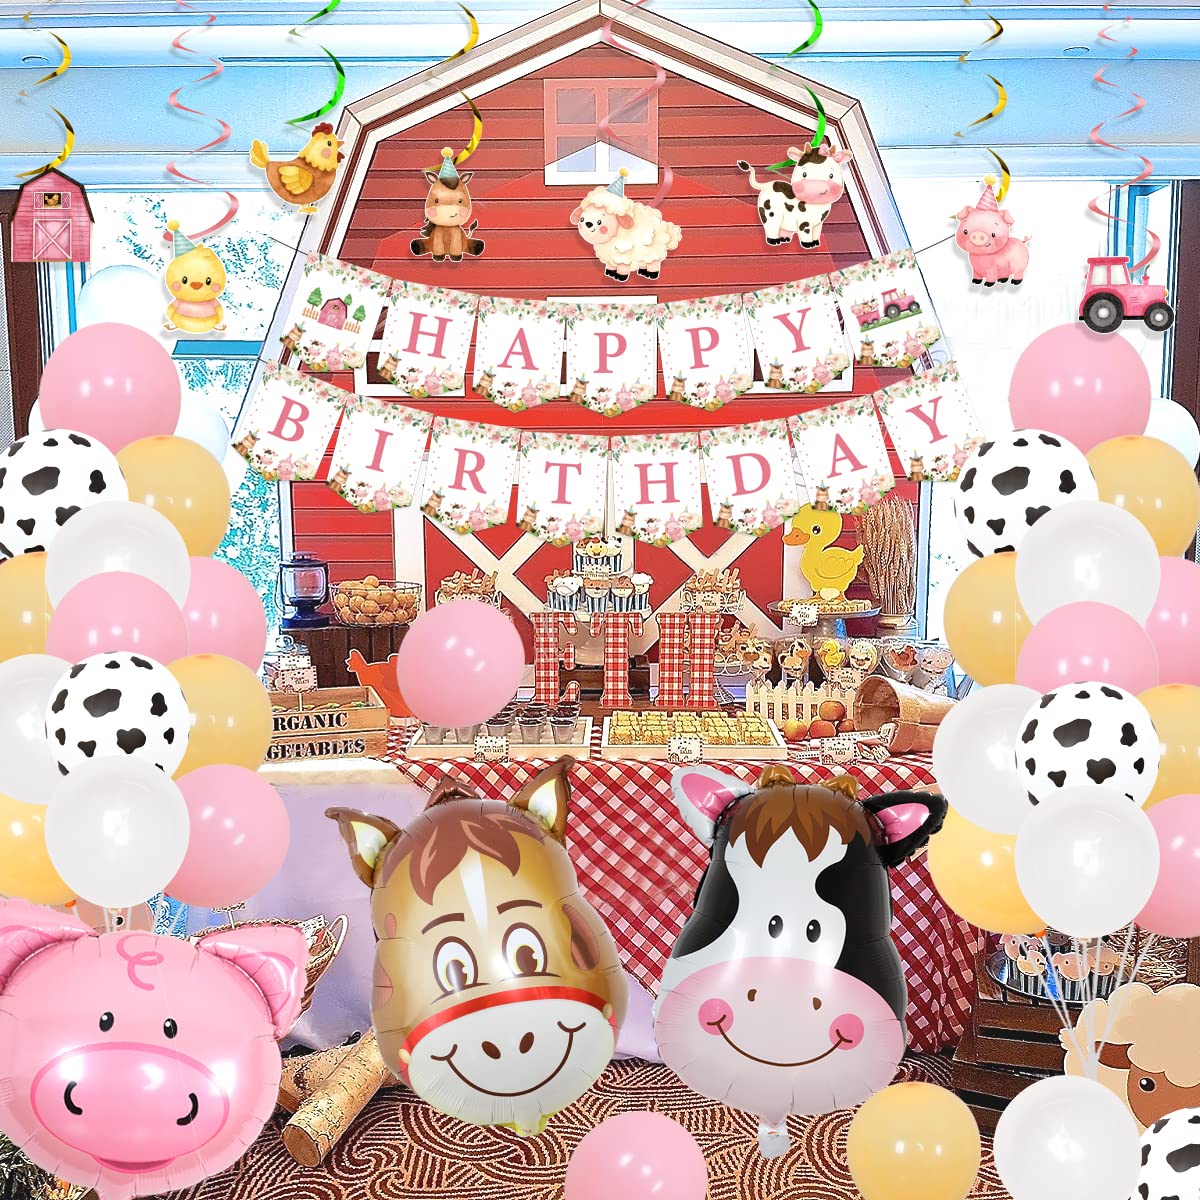 Pink Farm Animals Birthday Decorations for Girls Farmhouse Floral Theme Happy Birthday Banner Cow Pig Donkey Balloons Hanging Swirls Cake Cupcake Toppers for Kids Barnyard Theme Bday Party Supplies